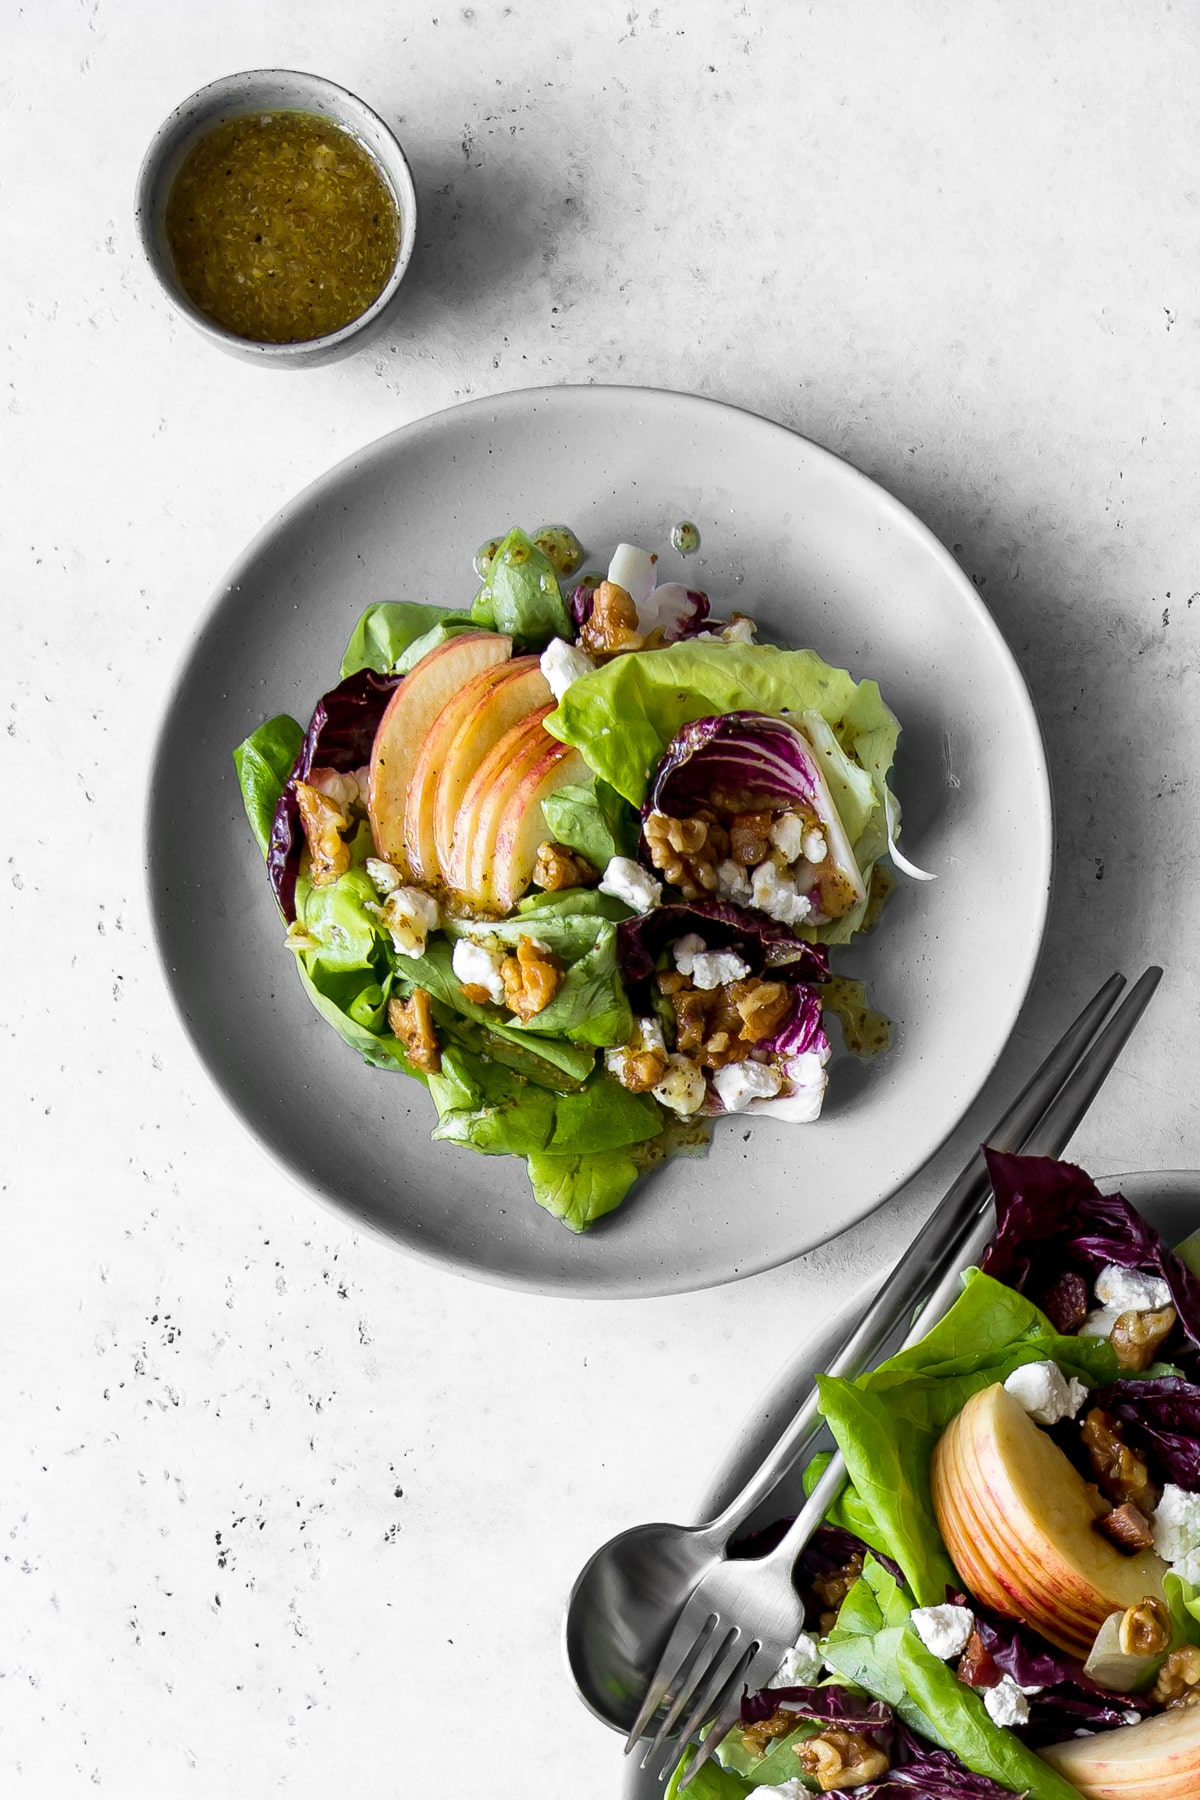 Plated Butter Lettuce and Radicchio Salad with Apples